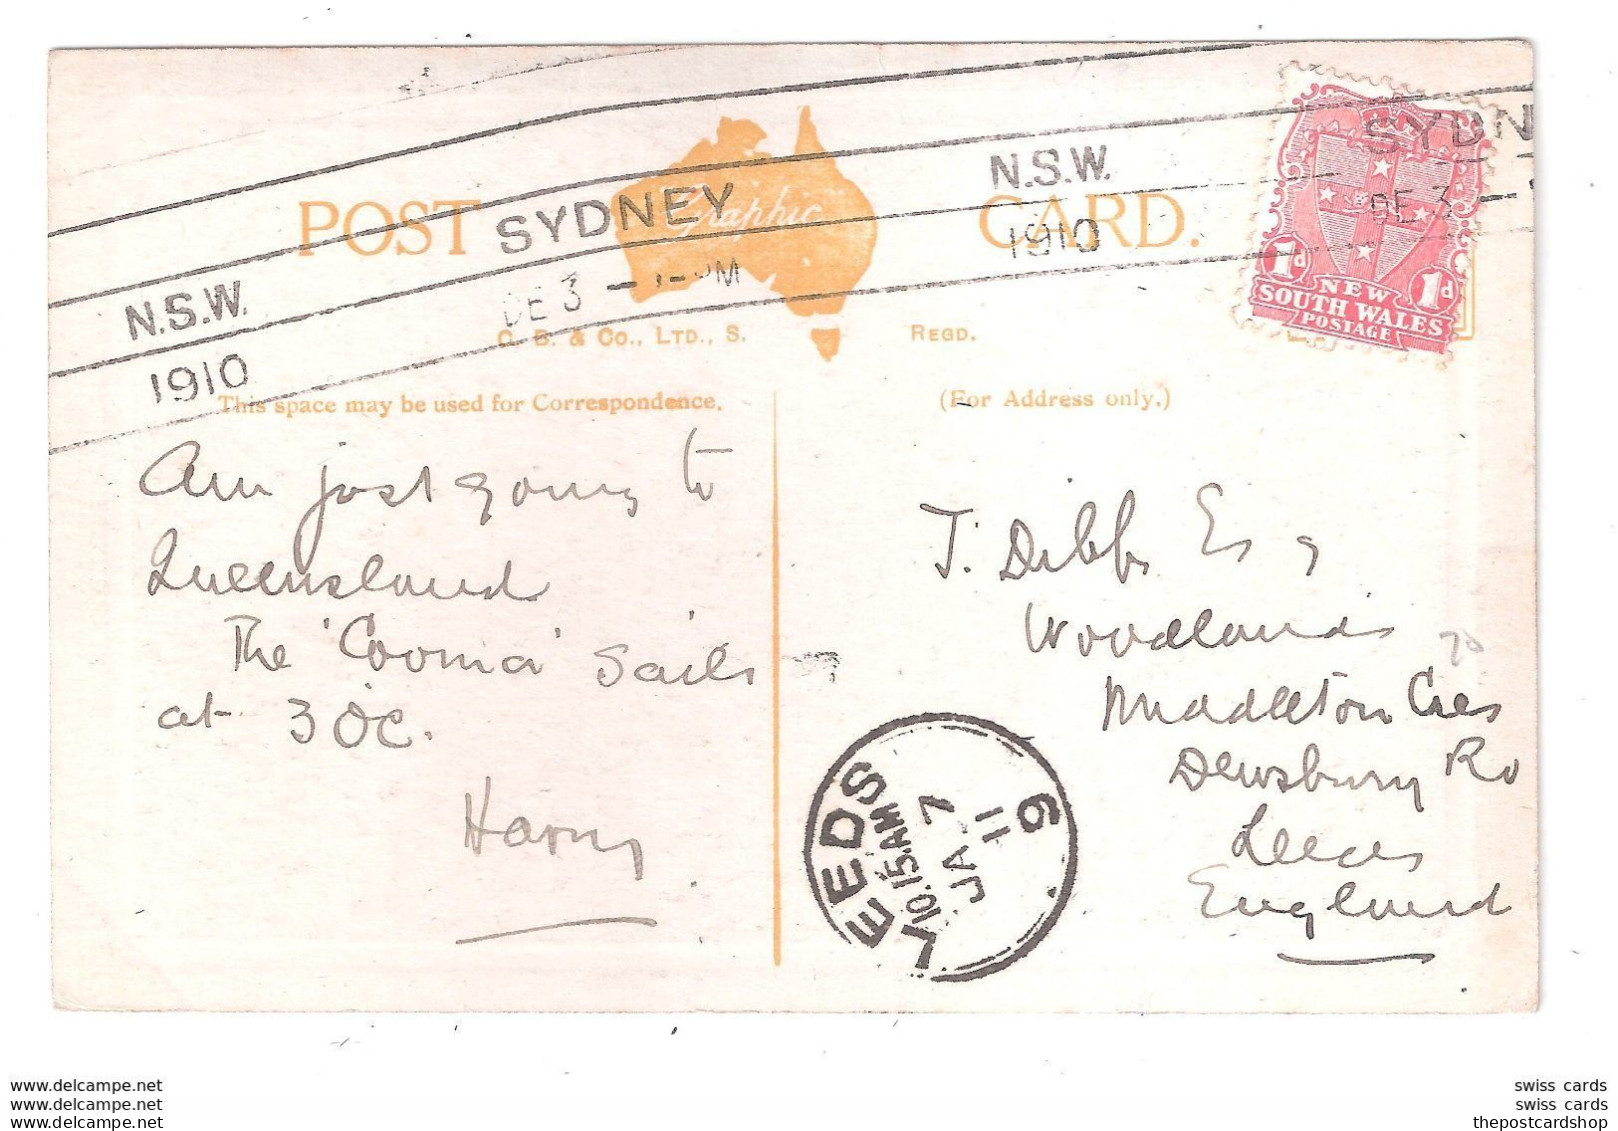 HYDE PARK SYDNEY NSW AUSTRALIA GRAPHIC SERIES USED WITH STAMP 1910 - Sydney